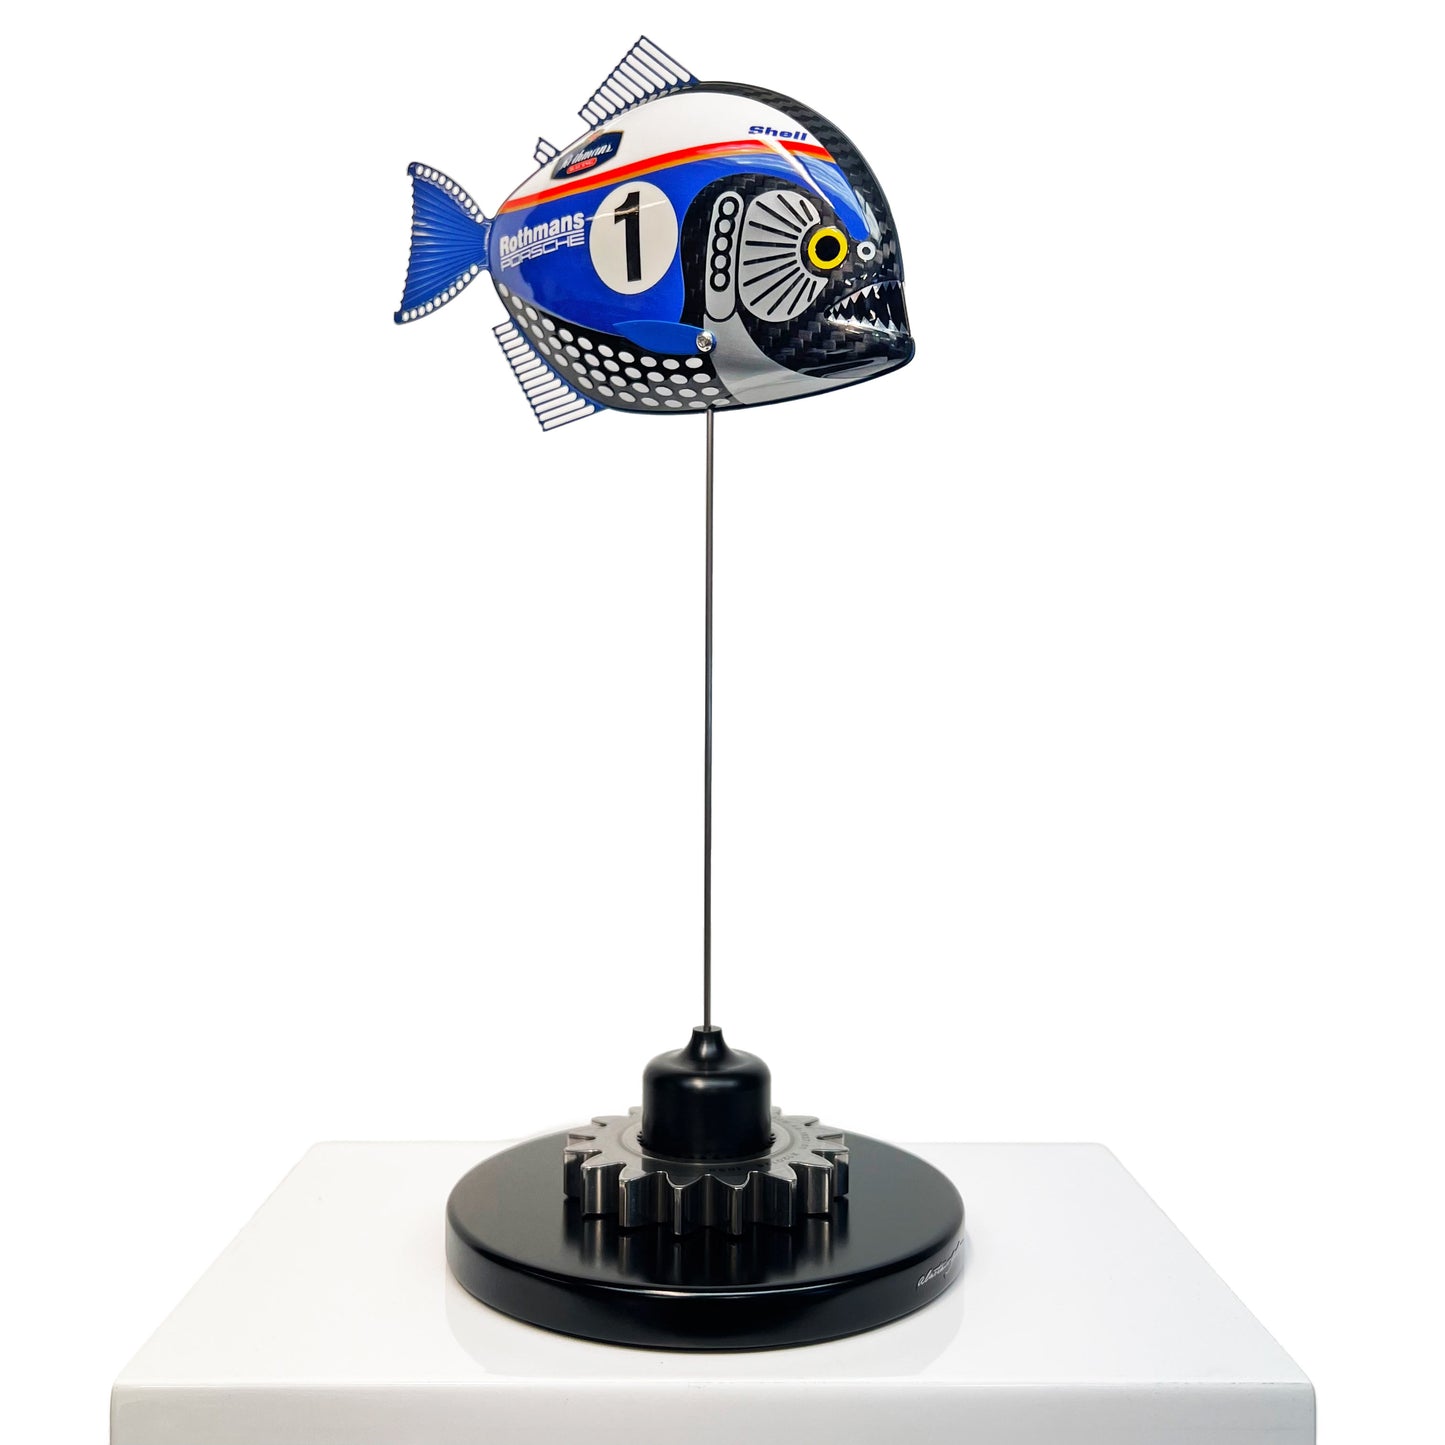 Carbon fibre Piranha with Rothmans Porsche livery on a black base with F1 gear